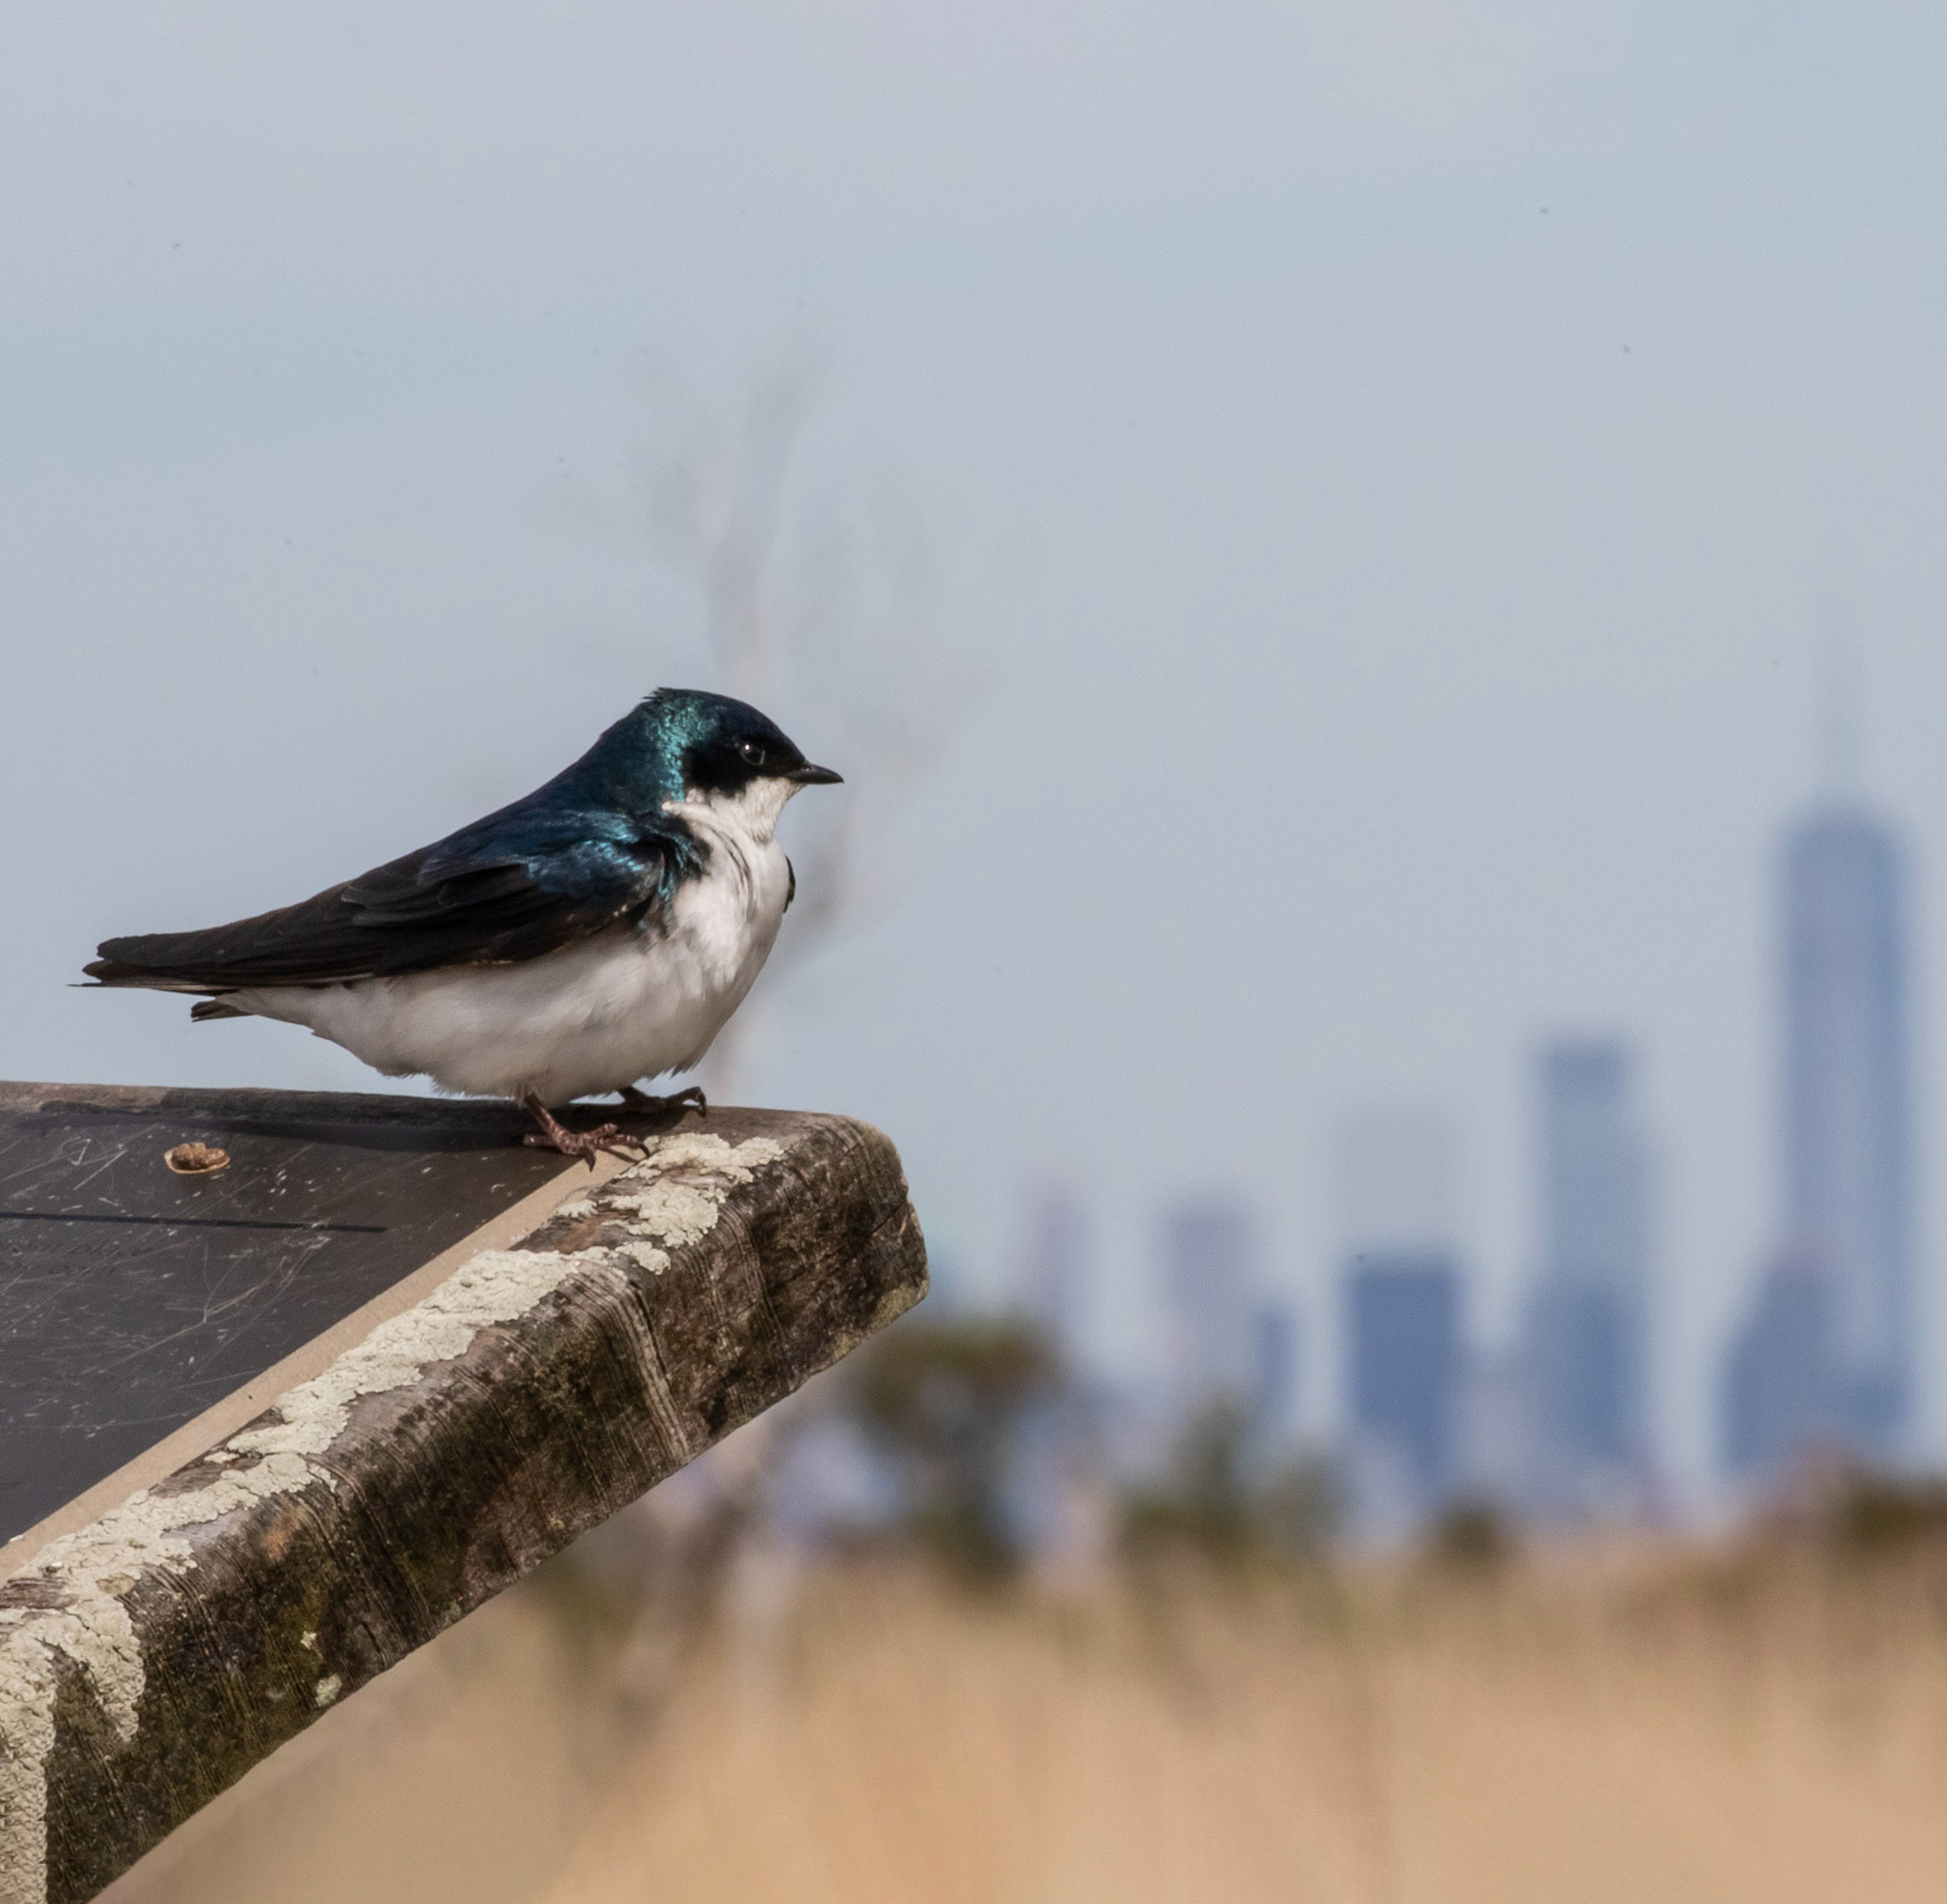 Much work remains to be done to make New York City safe for migrating birds. Photo of Tree Swallow in Jamaica Bay: <a href="https://www.flickr.com/photos/144871758@N05/" target="_blank">Ryan F. Mandelbaum</a>